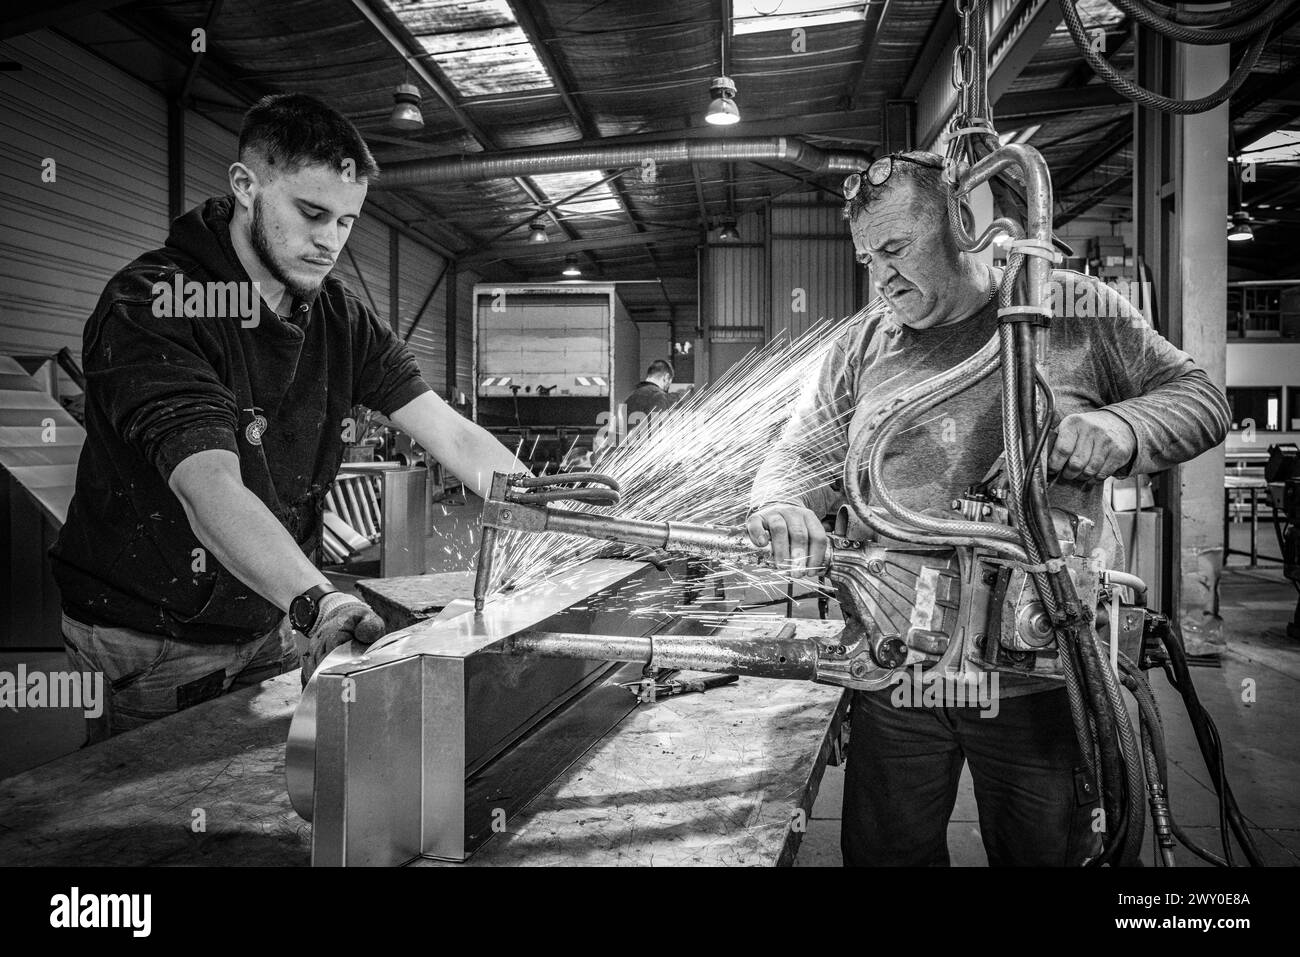 Two workers, one young and one senior, carry out spot welding of steel sheets in a manufacturing workshop. Stock Photo